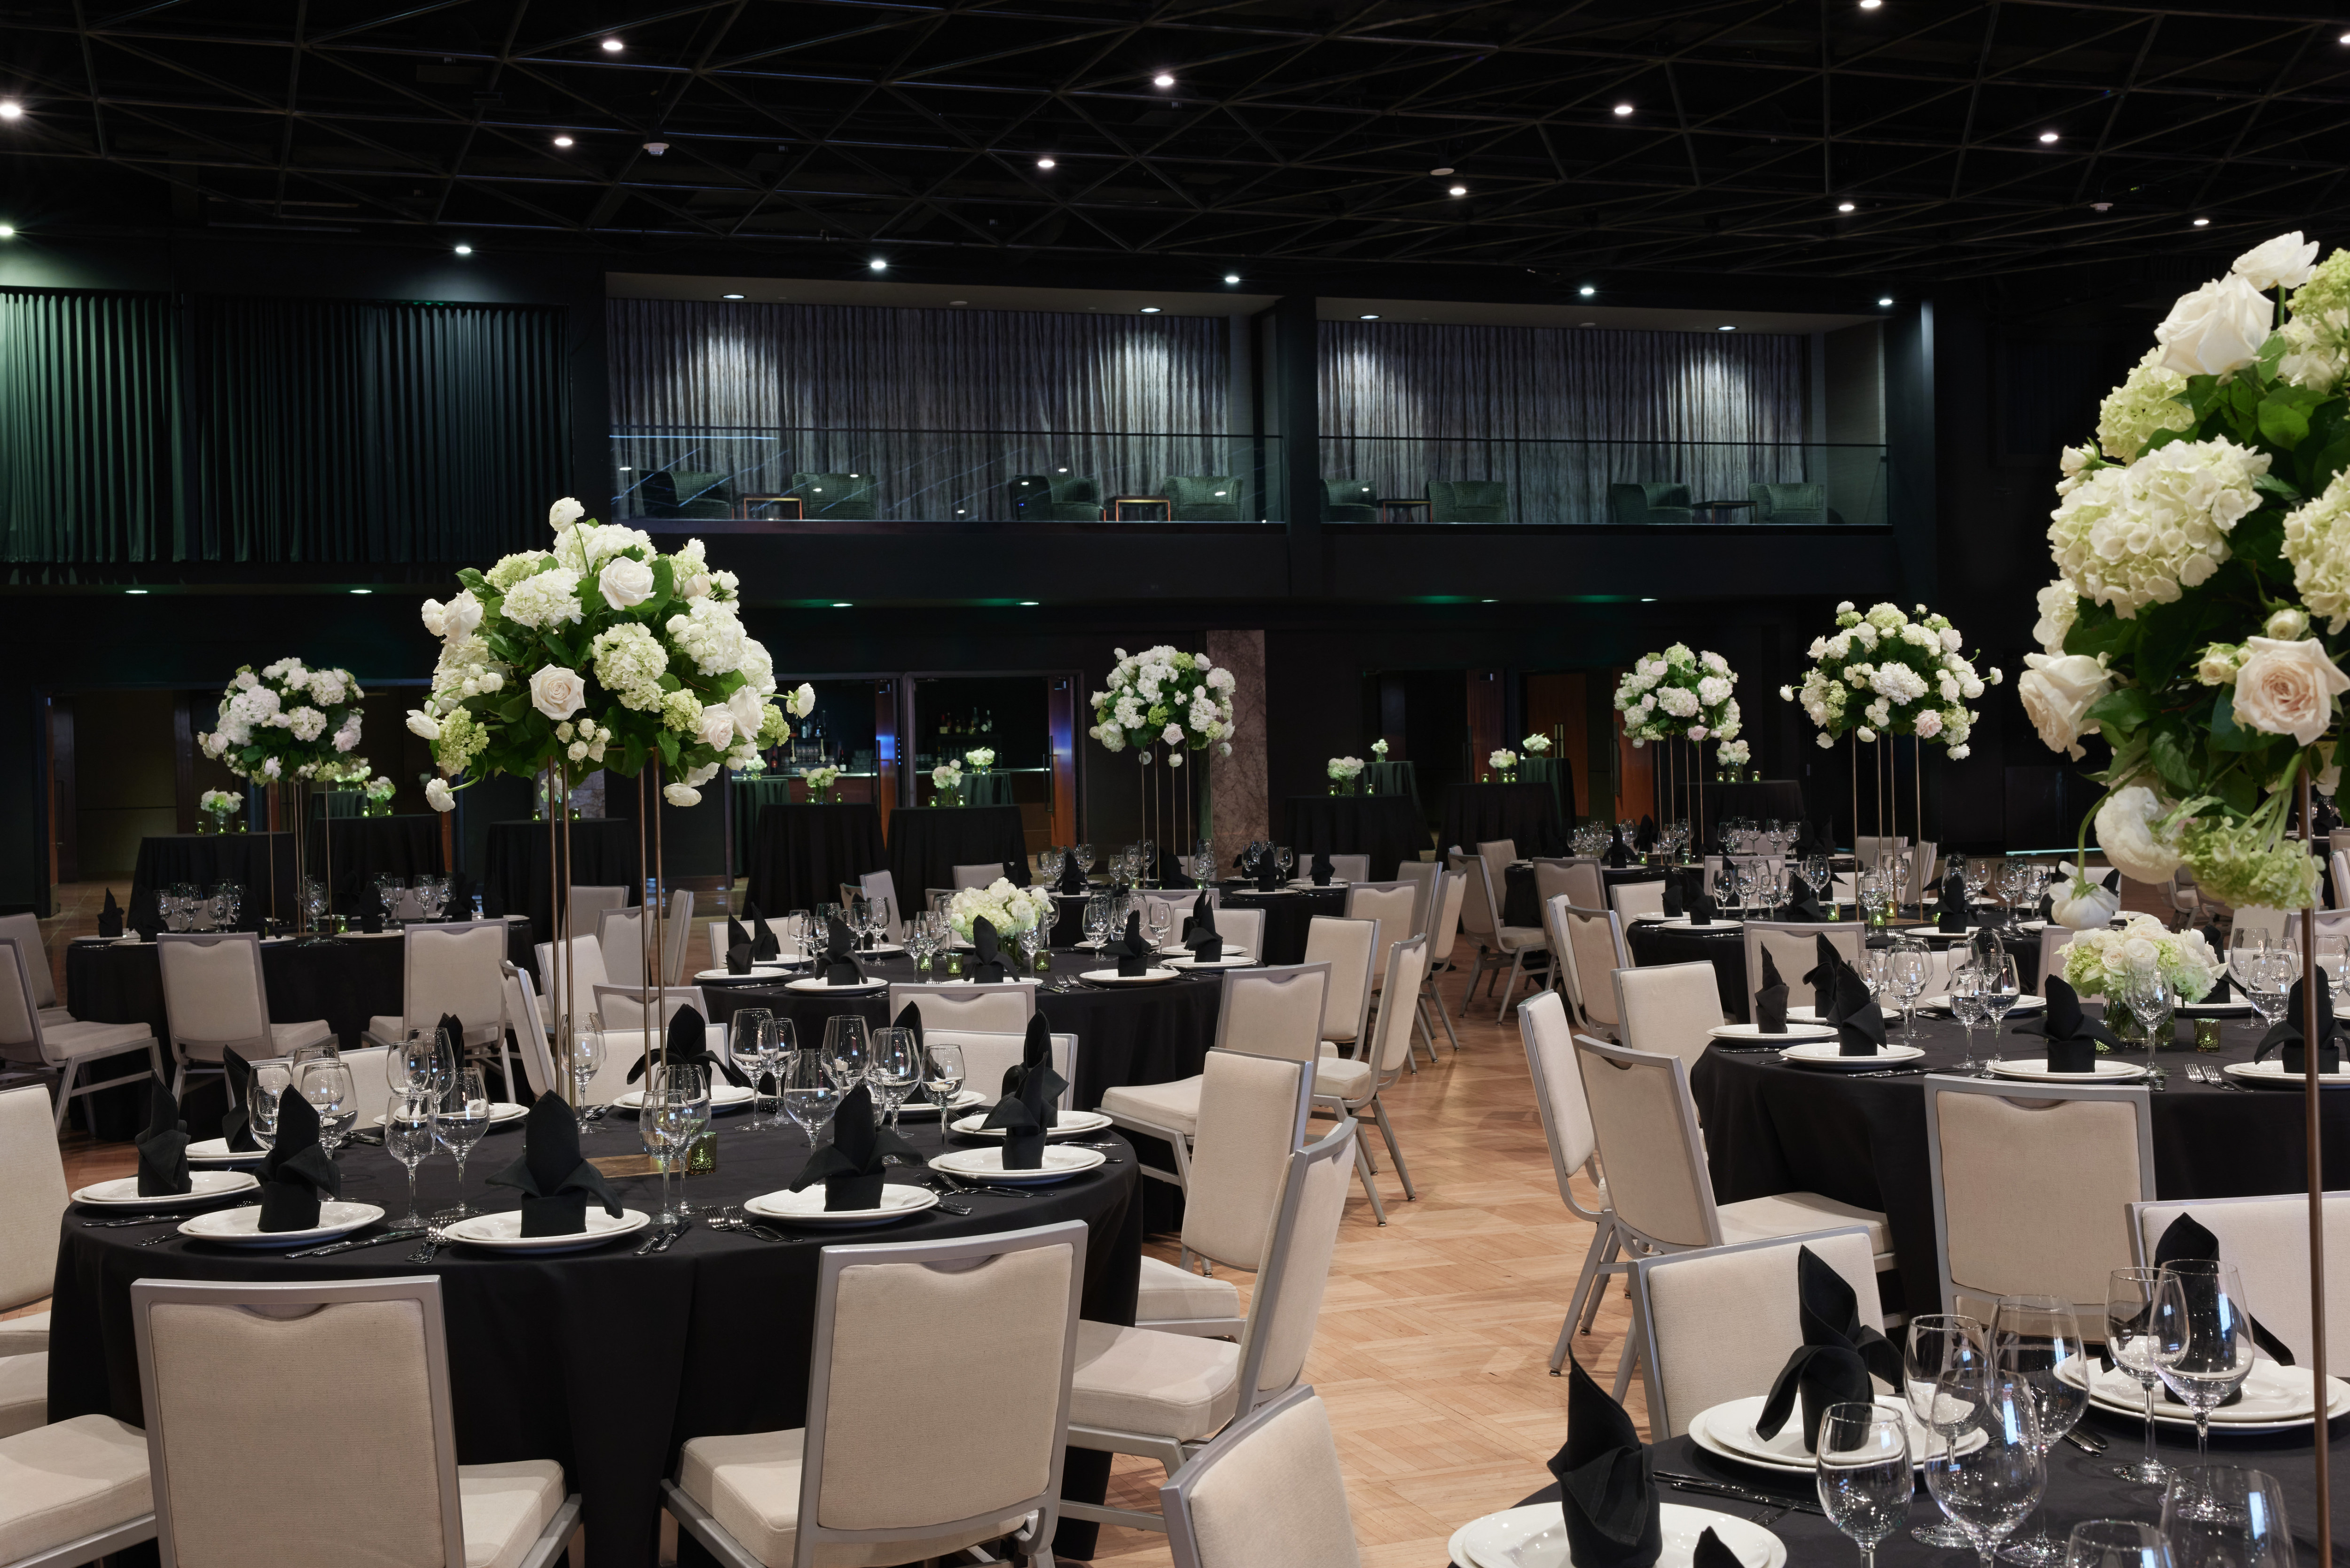 Ballroom Setup with Round Tables for a Special Event